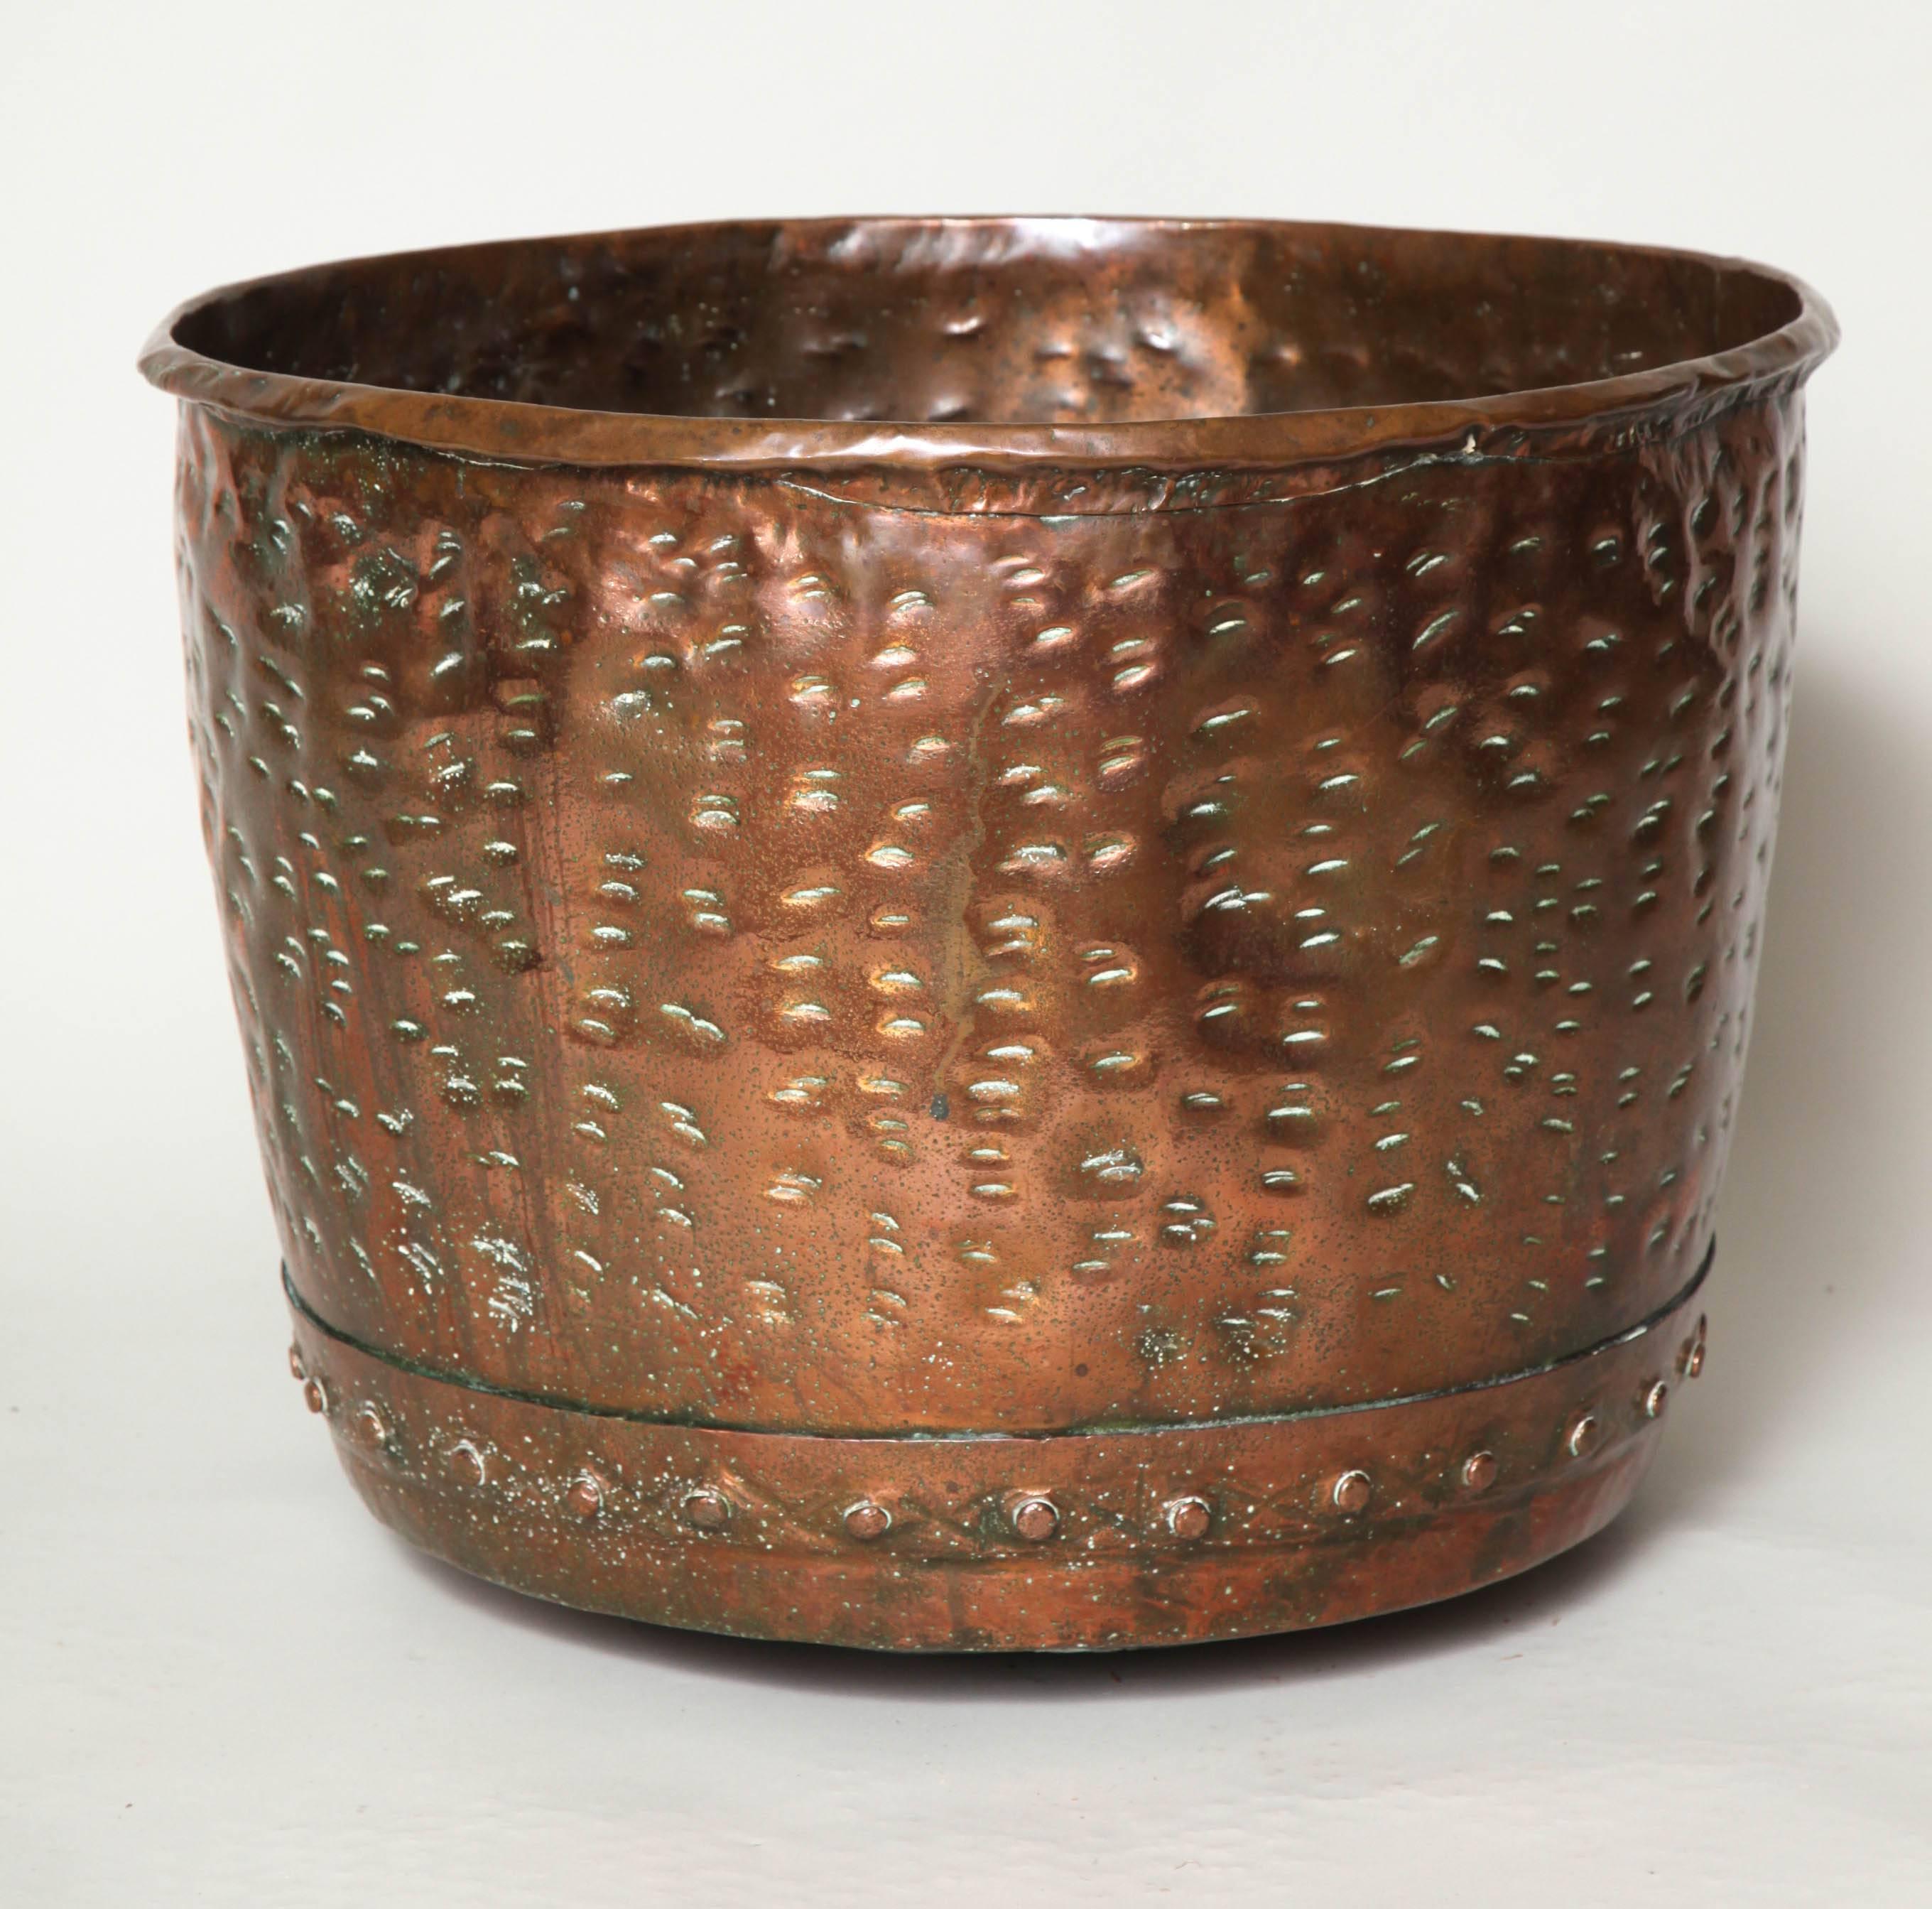 Unusual English mid-19th century copper log bucket with rolled edge, hand riveted seams and unusual hand hammered dimpled surface having a pleasing warm glowing surface.

Firewood holder, log bin, planter.